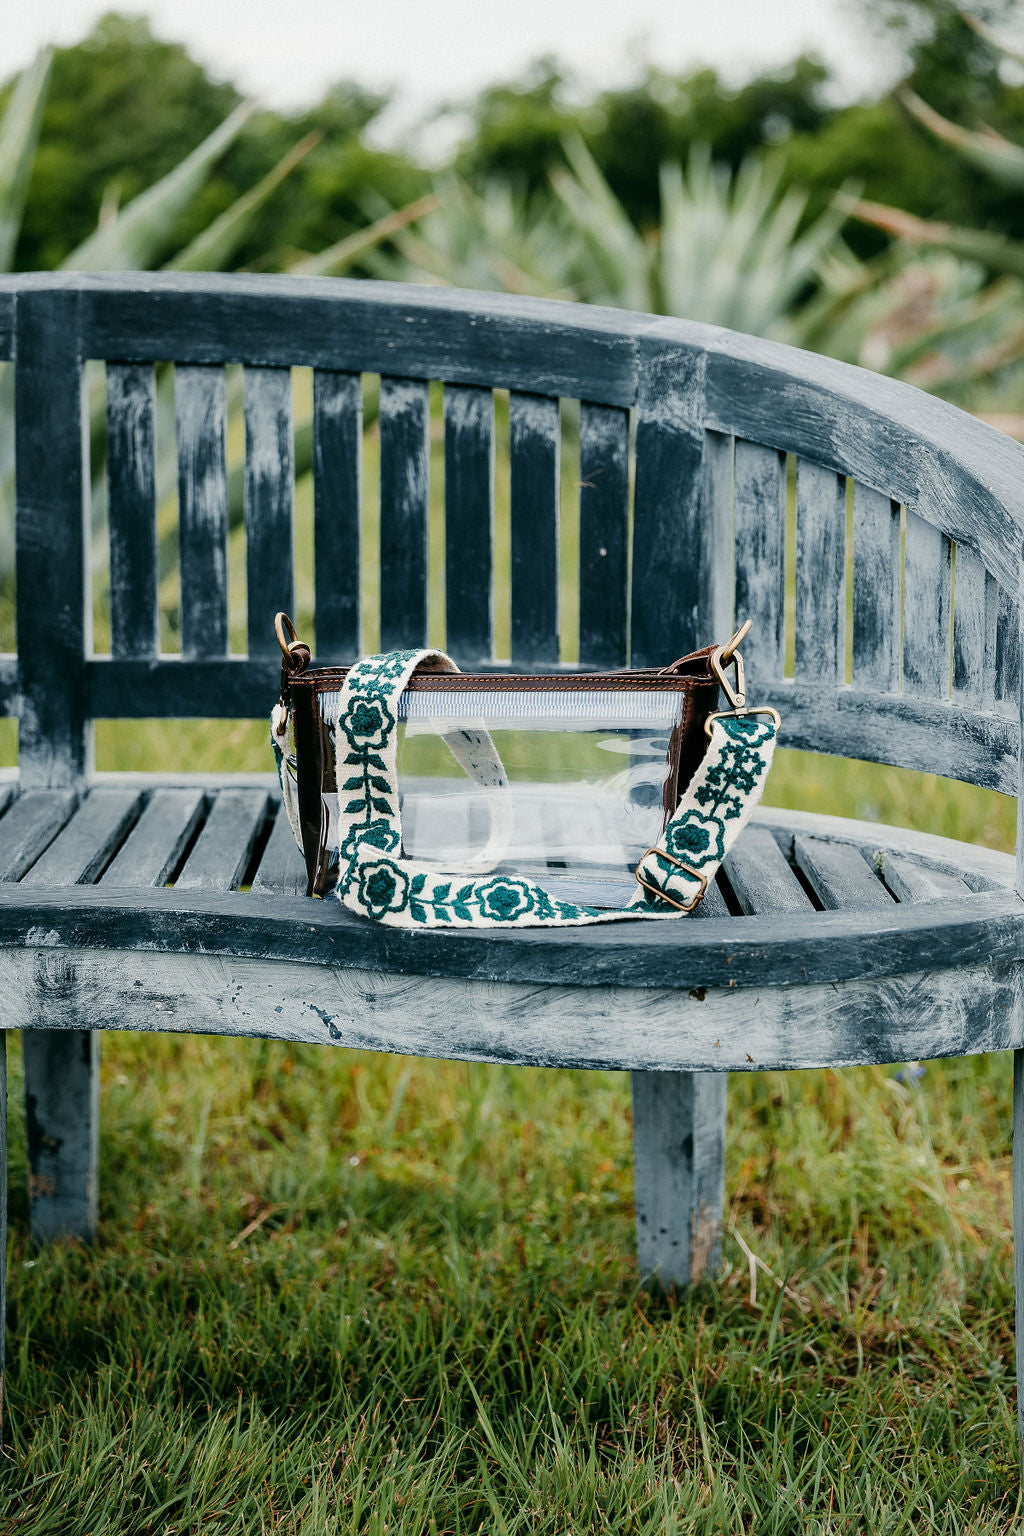 Jill Adjustable Strap, a clear bag with a green strap, on bench in an outdoor setting.